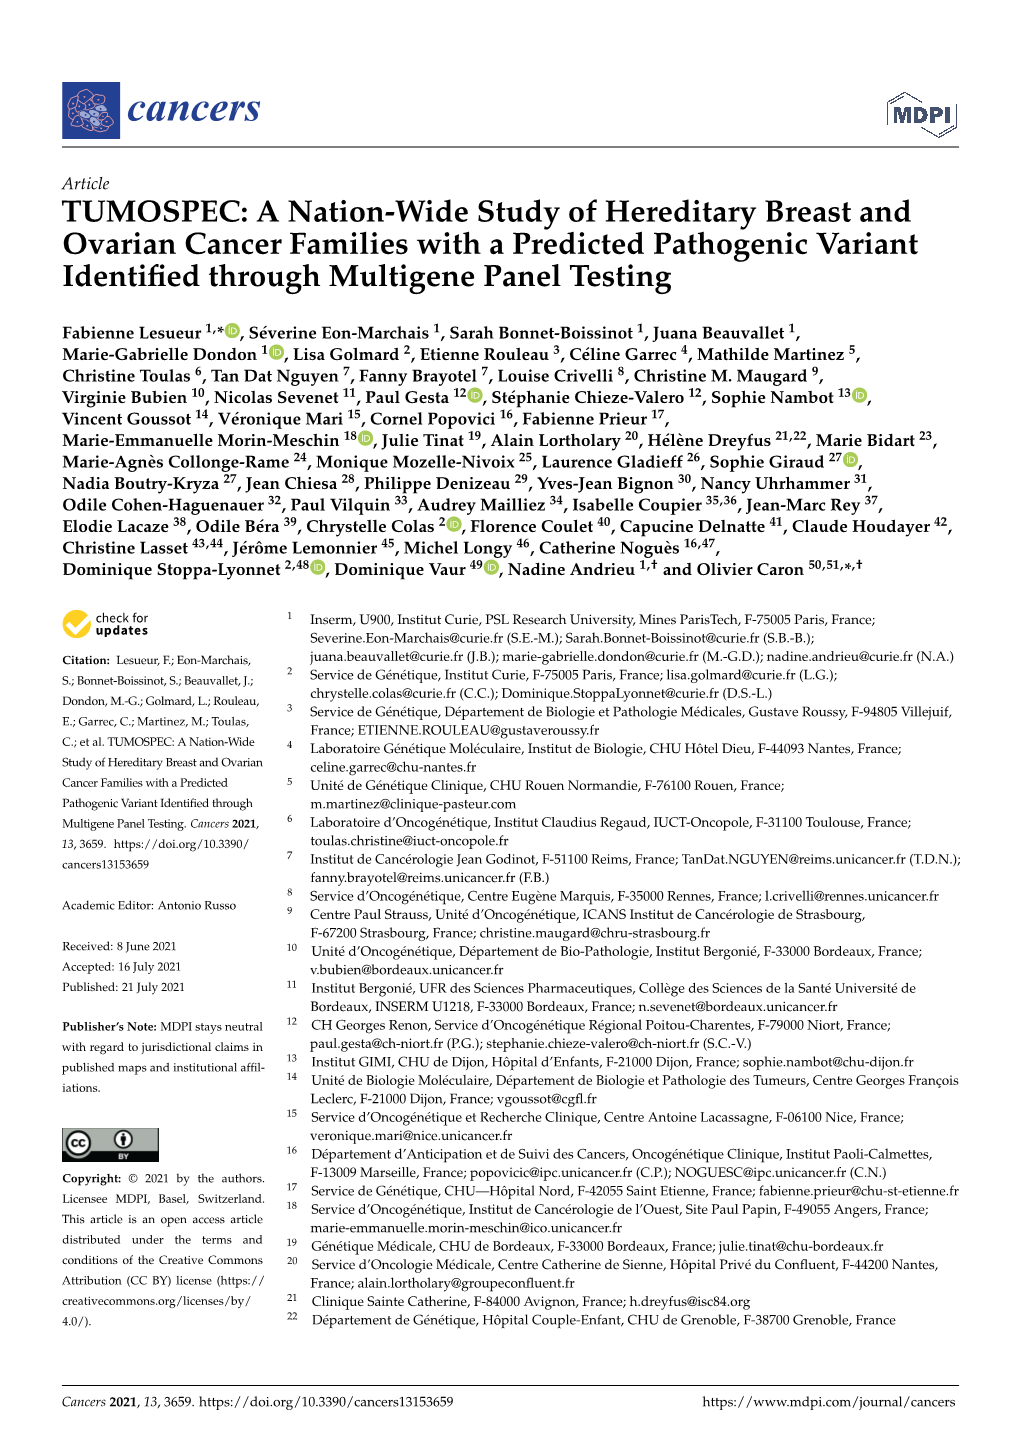 A Nation-Wide Study of Hereditary Breast and Ovarian Cancer Families with a Predicted Pathogenic Variant Identiﬁed Through Multigene Panel Testing